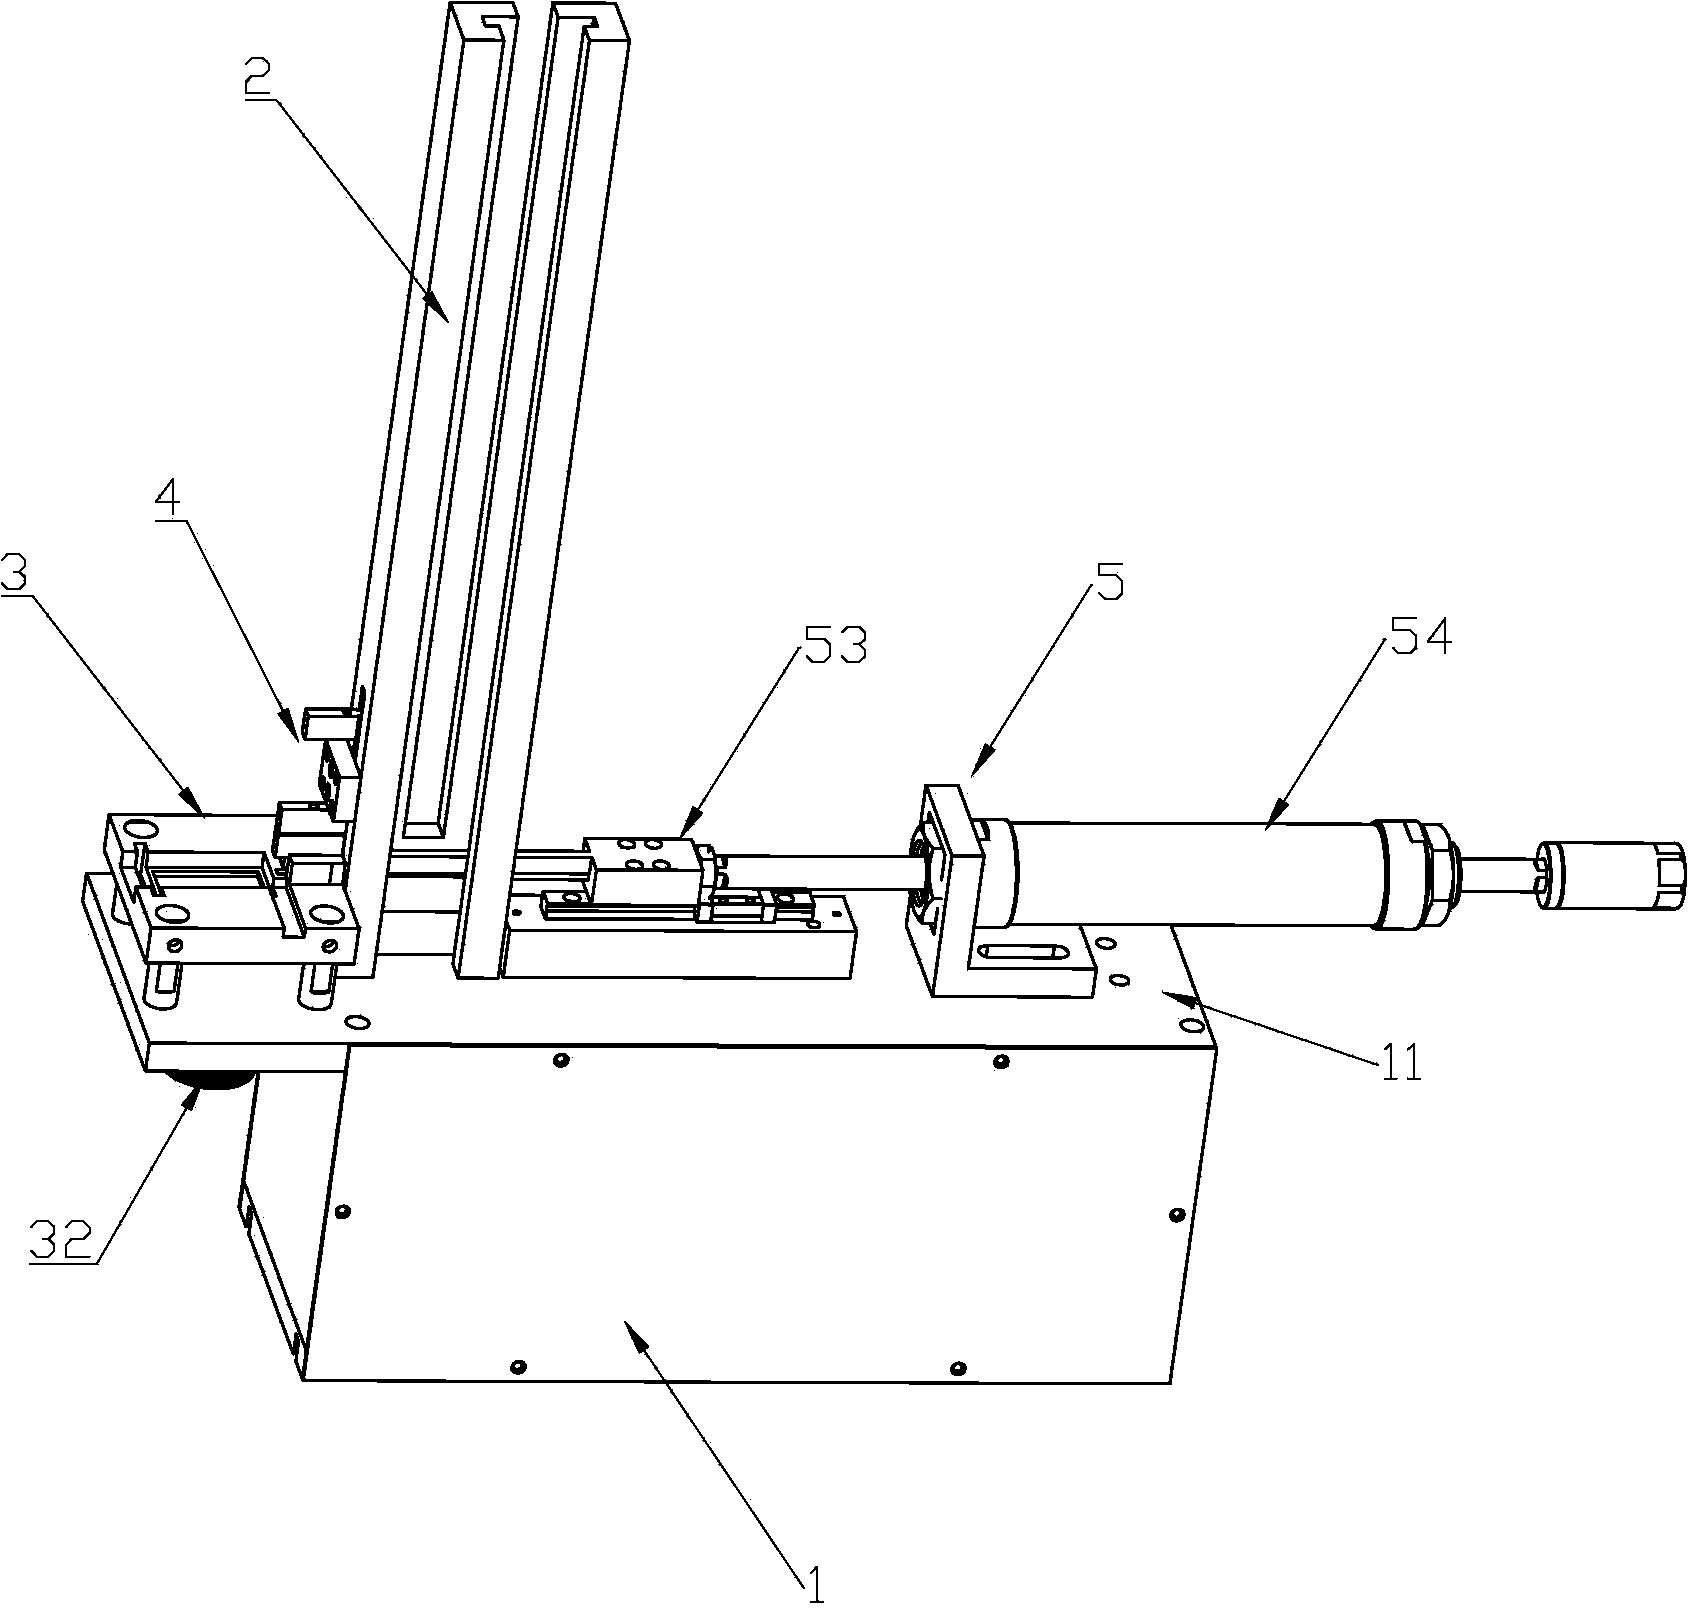 Sheet inserting machine applied to inductor